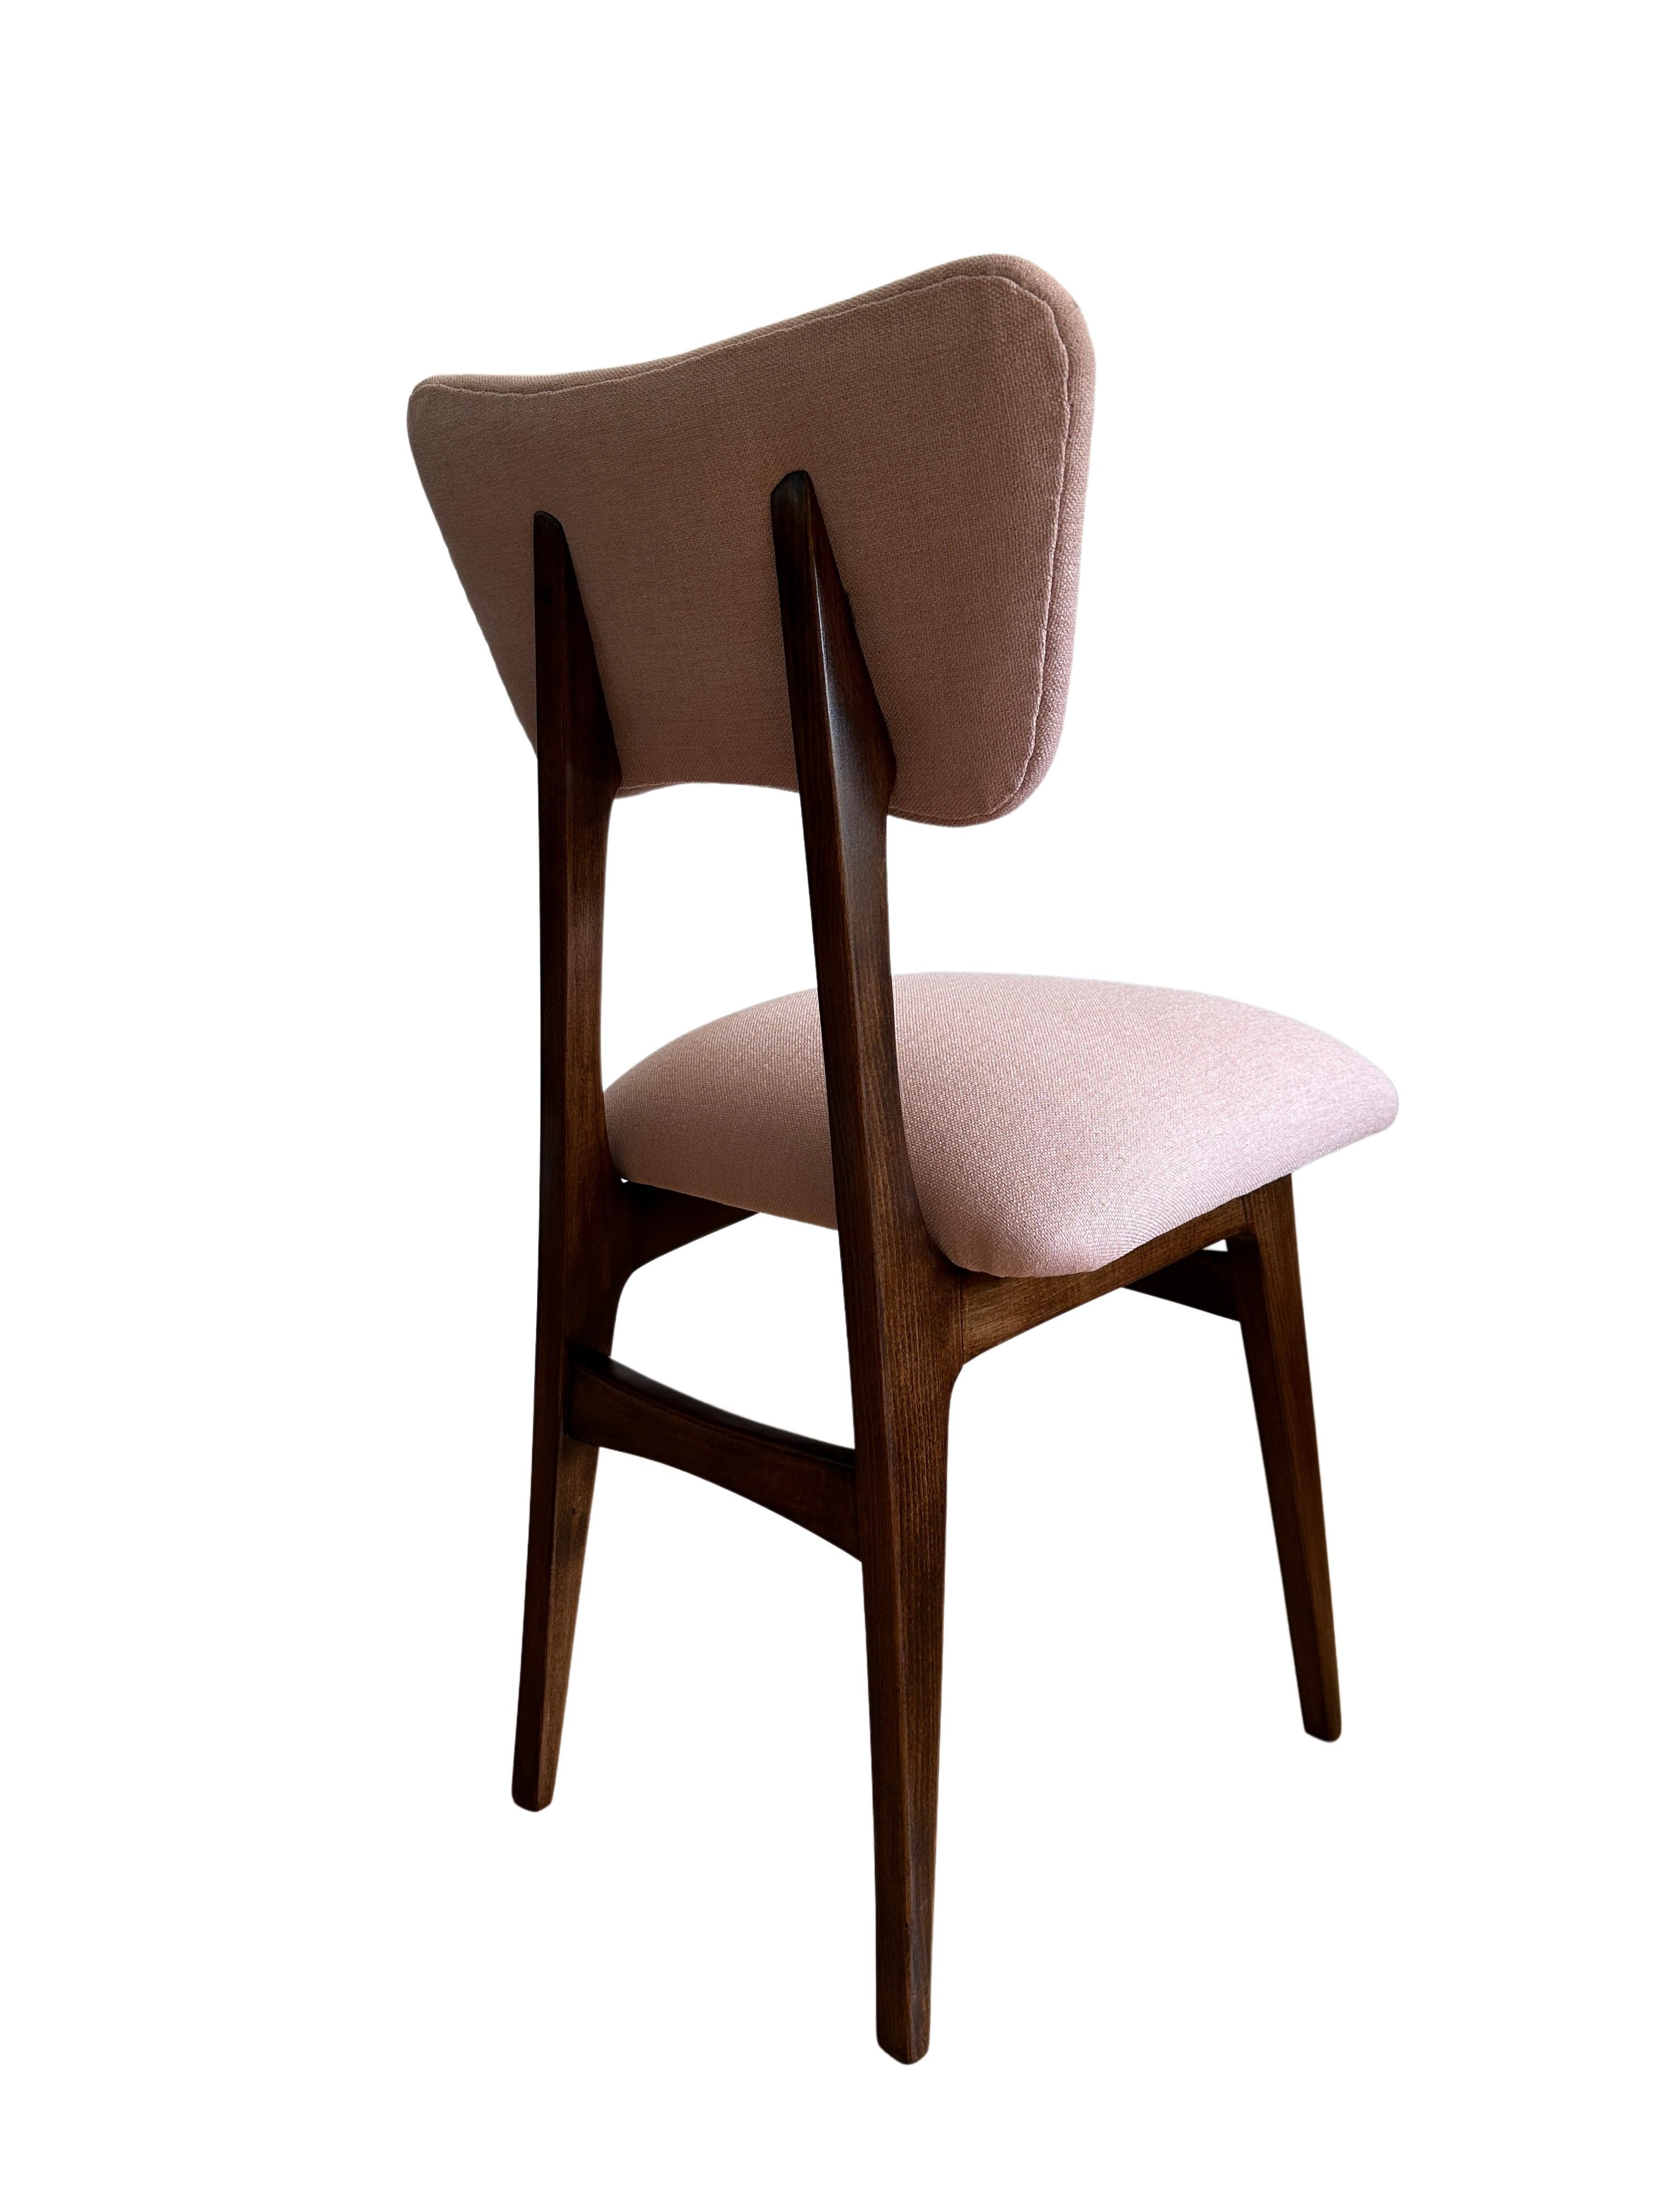 Hand-Crafted Set of 6 Midcentury Light Pink Dining Chairs, Europe, 1960s For Sale